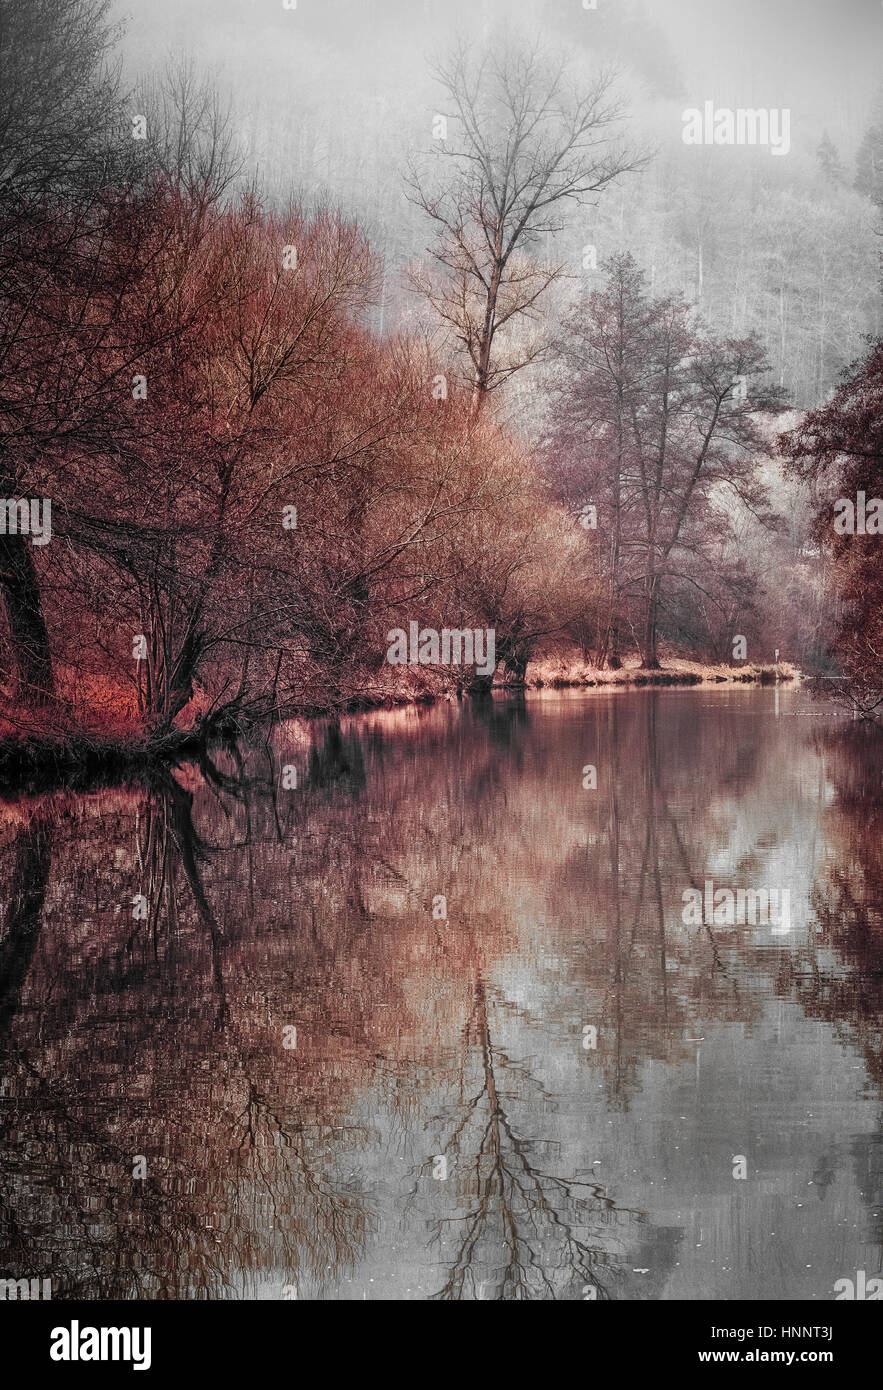 idyllic misty snowy retro color riverside,old trees reflecting on the water,vintage painting style,moody landscape impression Stock Photo